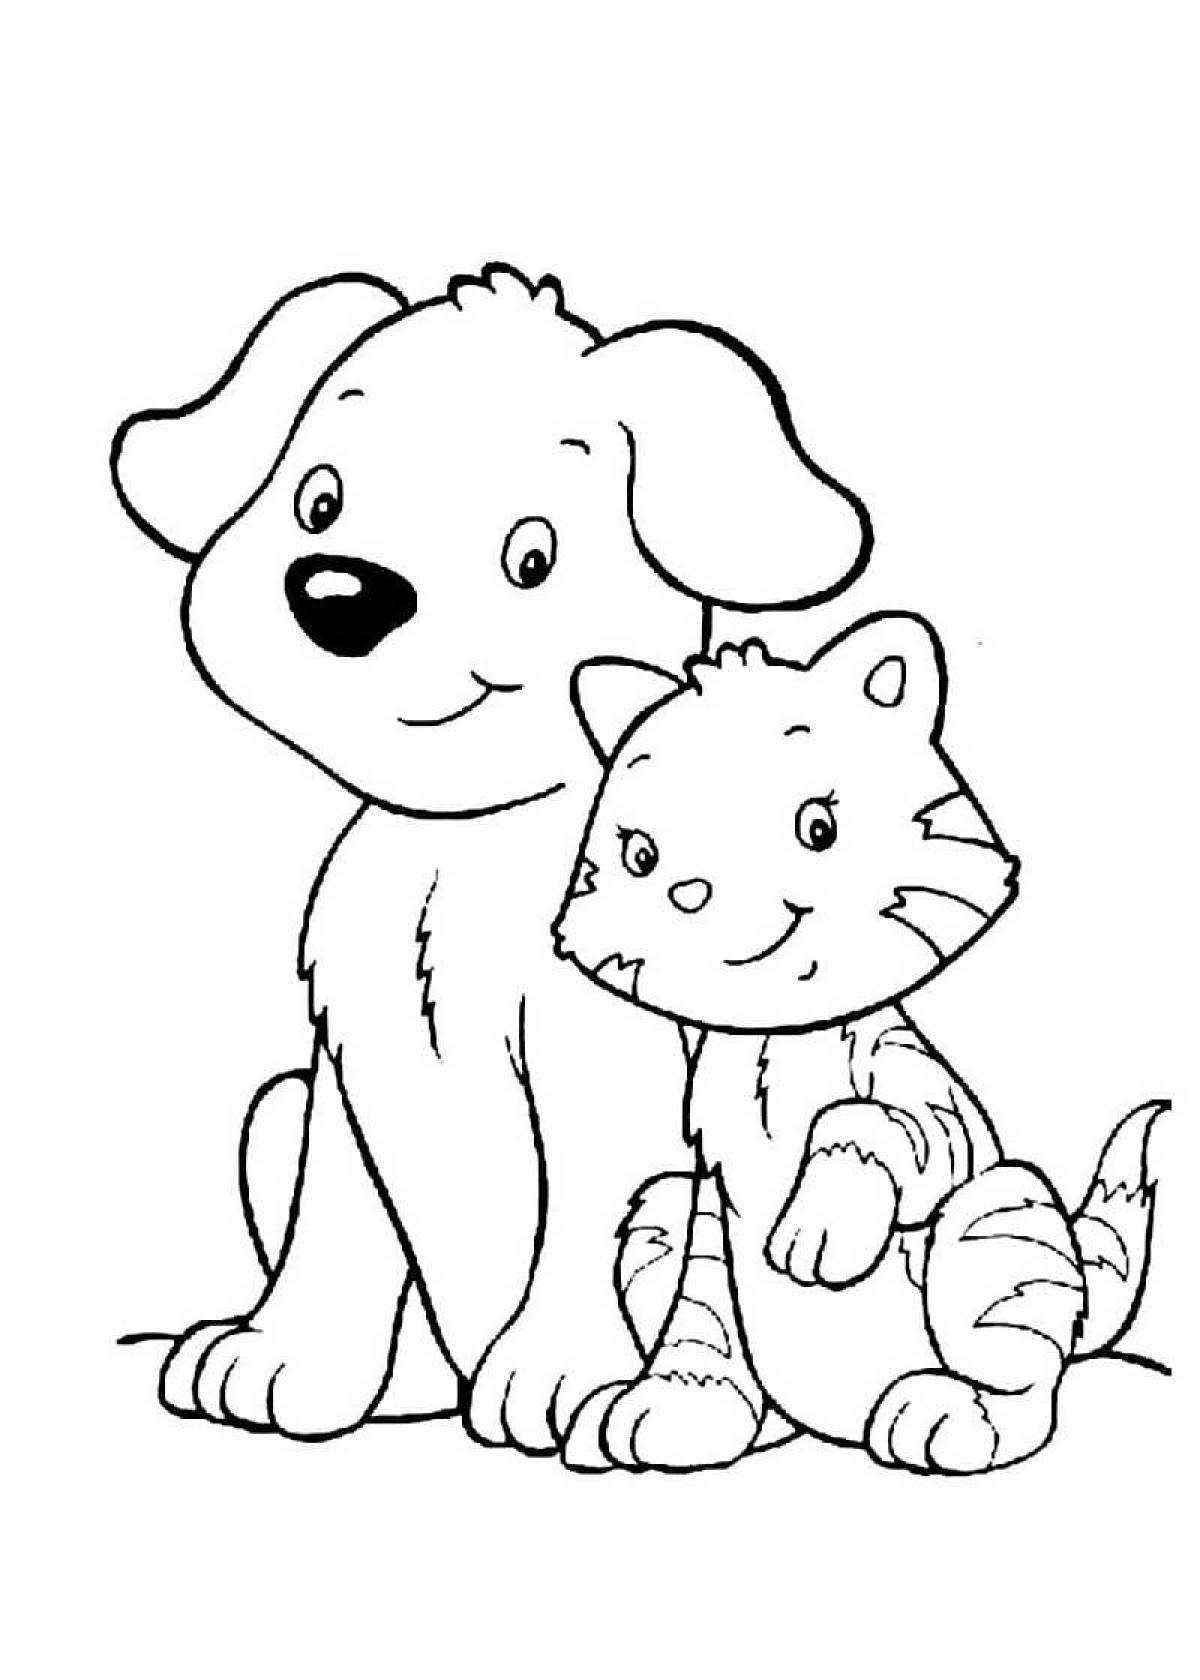 Fluffy doggie kitties coloring pages for kids